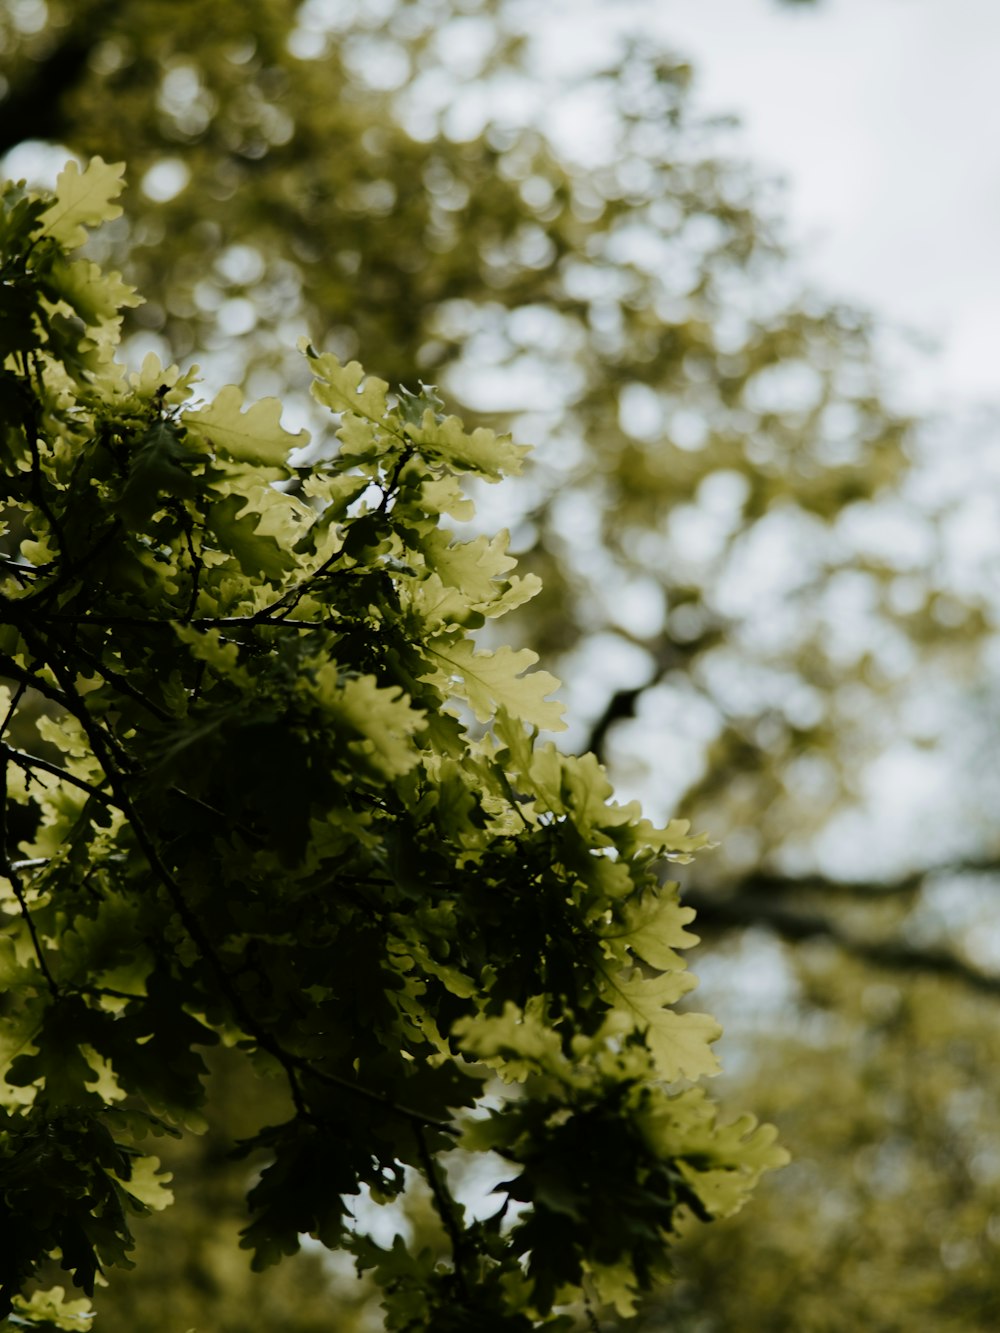 green leafed trees in close-up photo